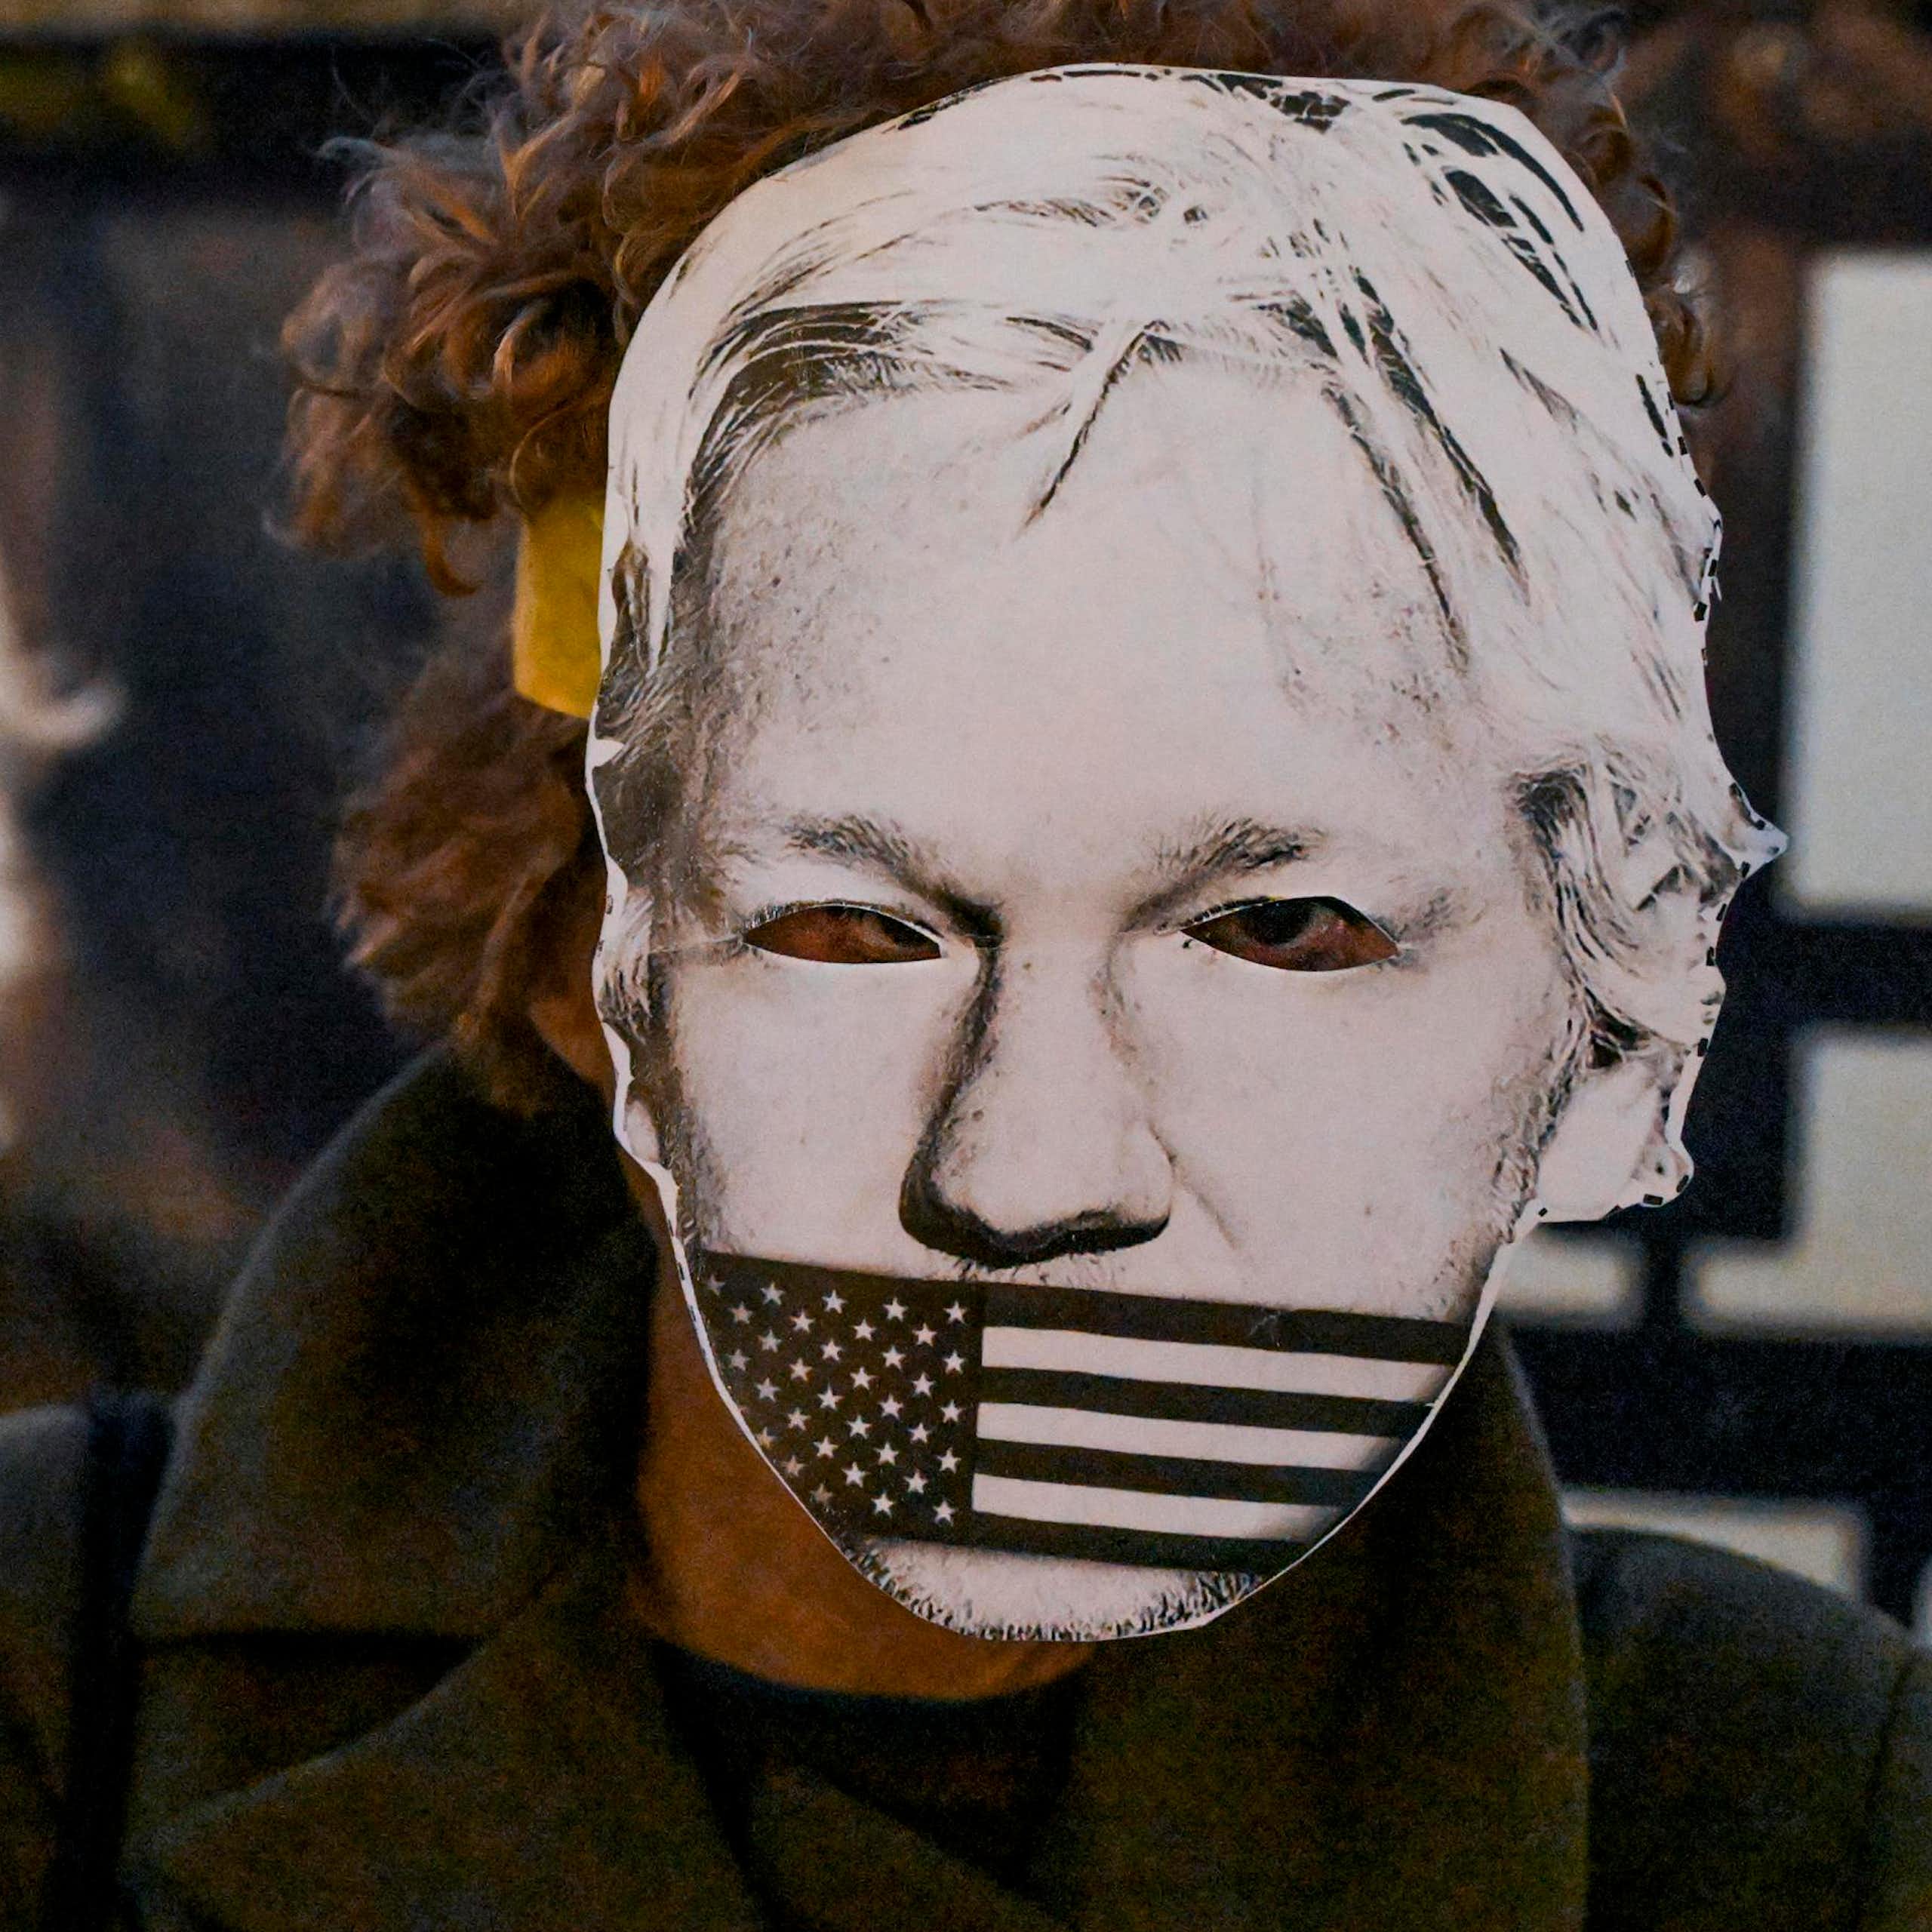 A person wearing a paper mask depicting Julian Assange's face with an american flag over his mouth